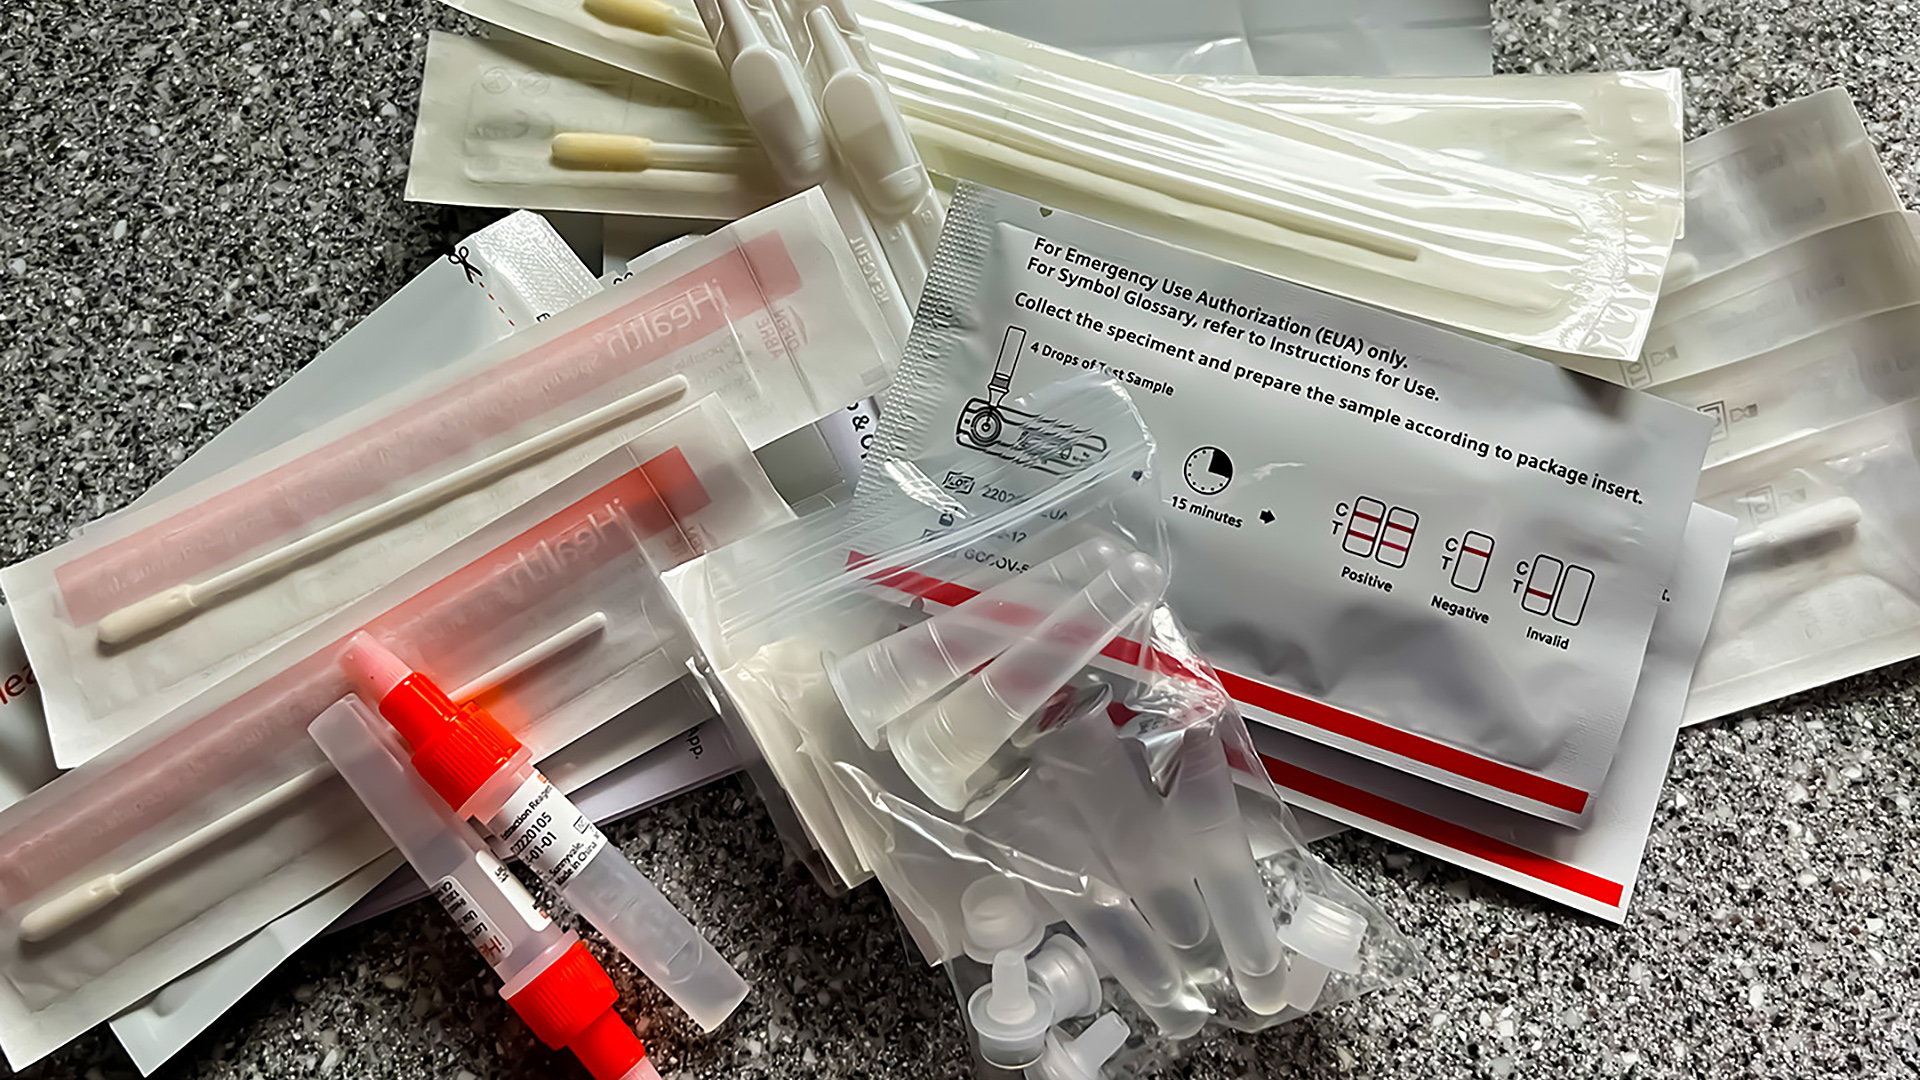 Swabs, vials and other elements of at-home COVID-19 antigen test kits sit on a counter.